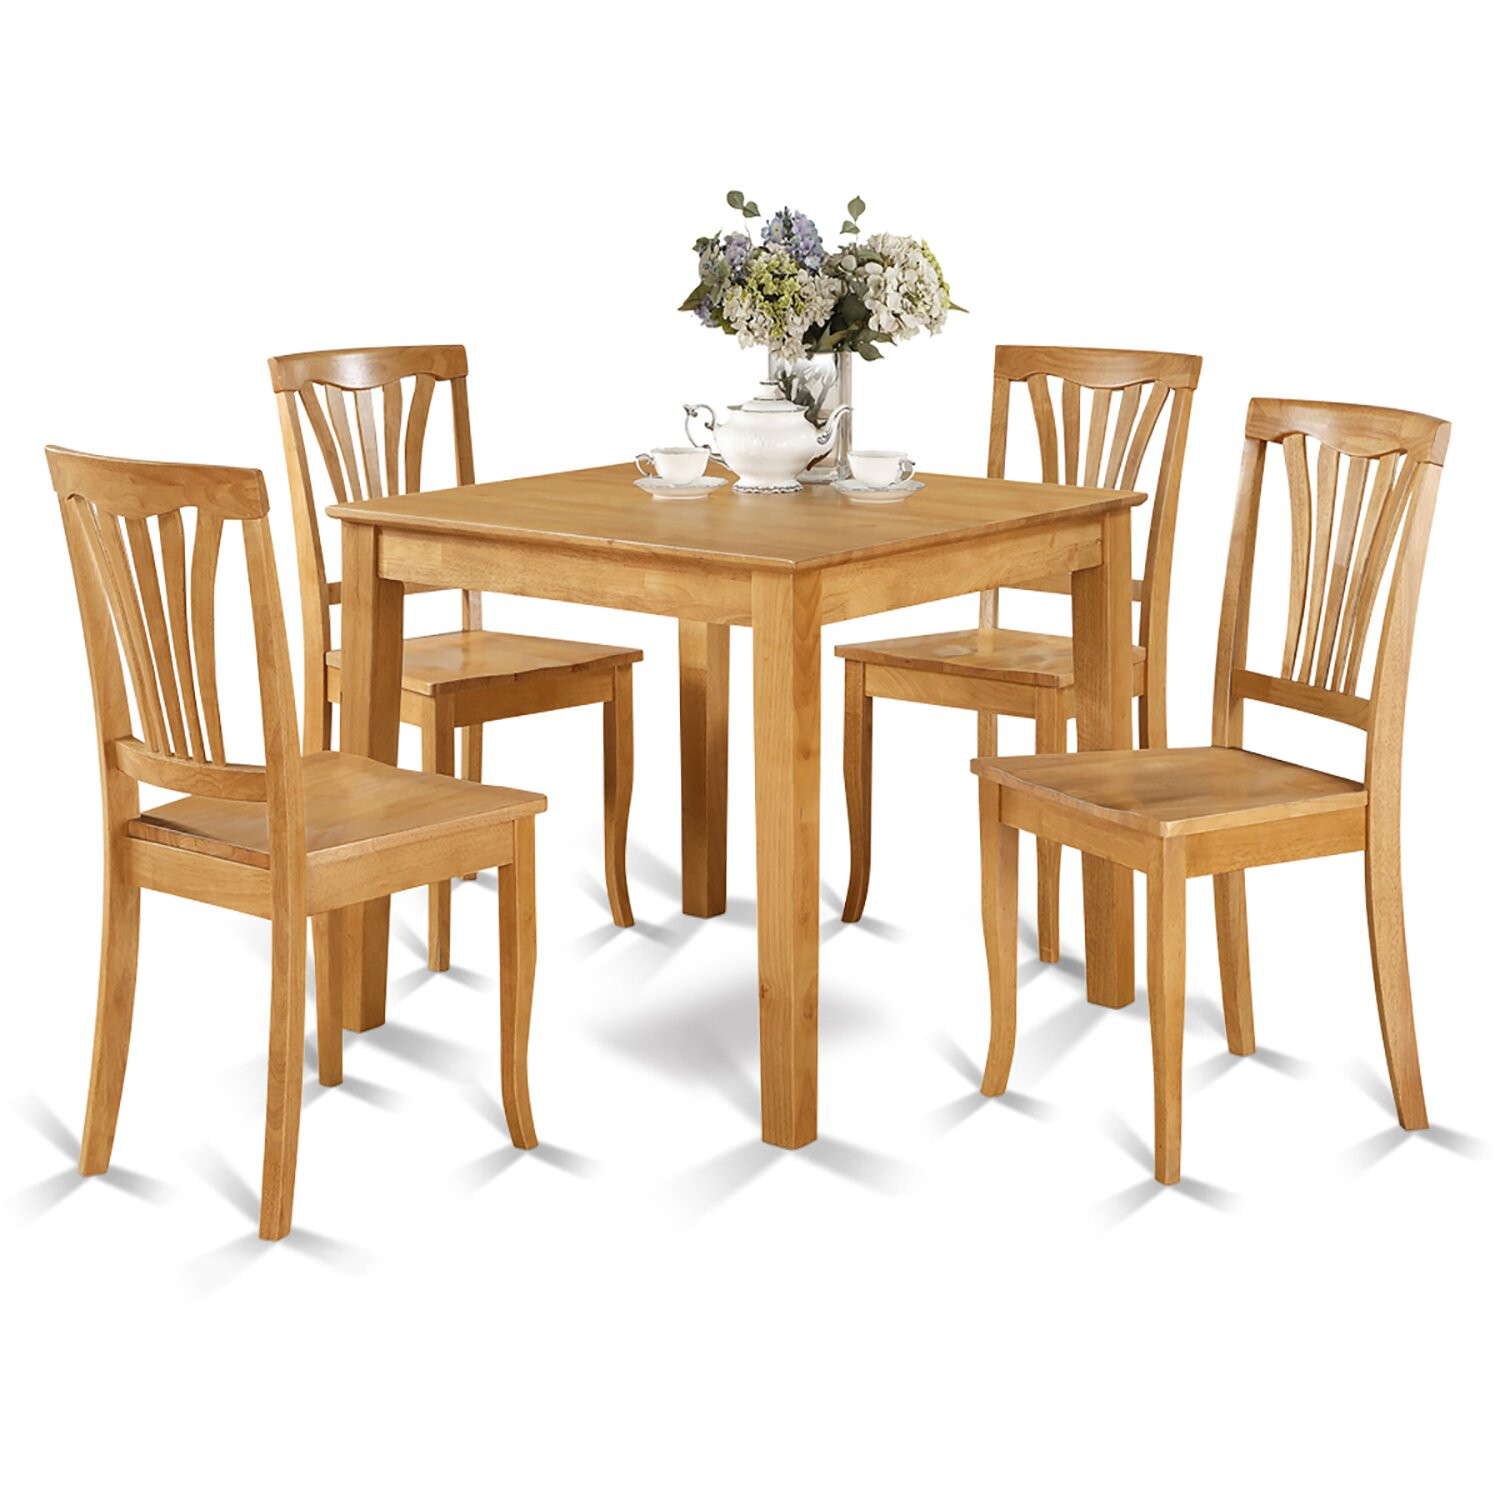 Wayfair Small Kitchen Tables
 Wooden Importers Oxford 5 Piece Dining Set & Reviews